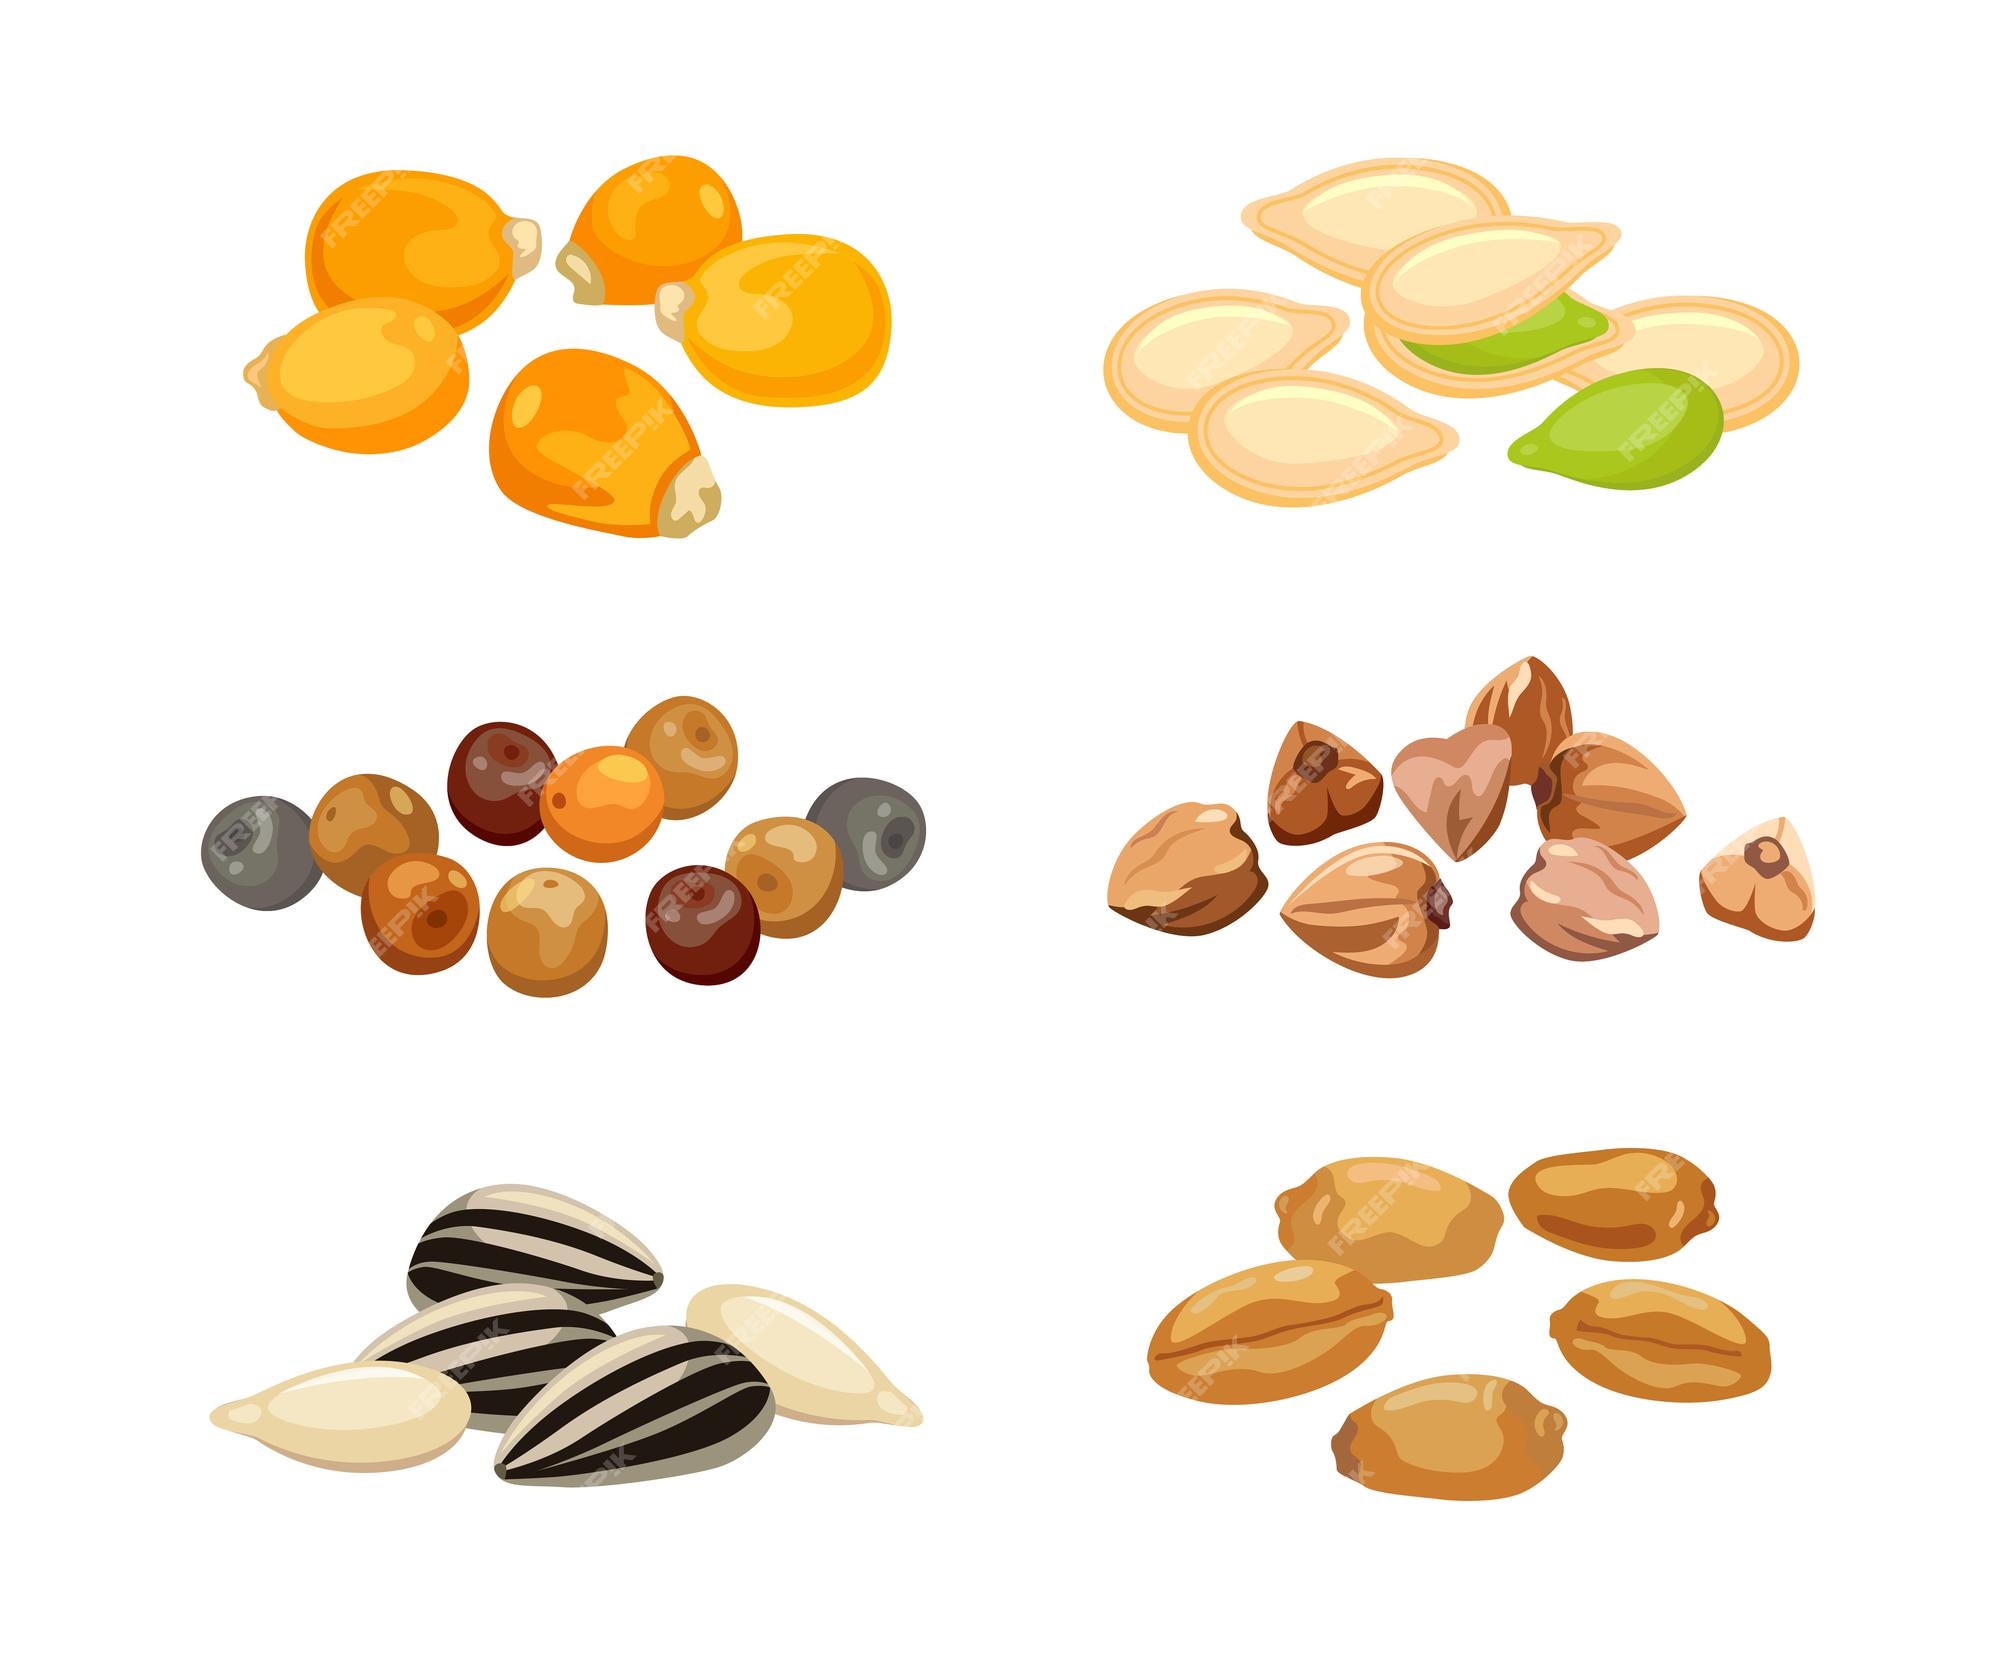 Premium Vector | Plant seeds cartoon illustration set. cereal grains,  chickpeas, corn, pumpkin, sunflower seeds isolated on white background.  flat vector collection for agriculture, nutrition and healthy diet concept